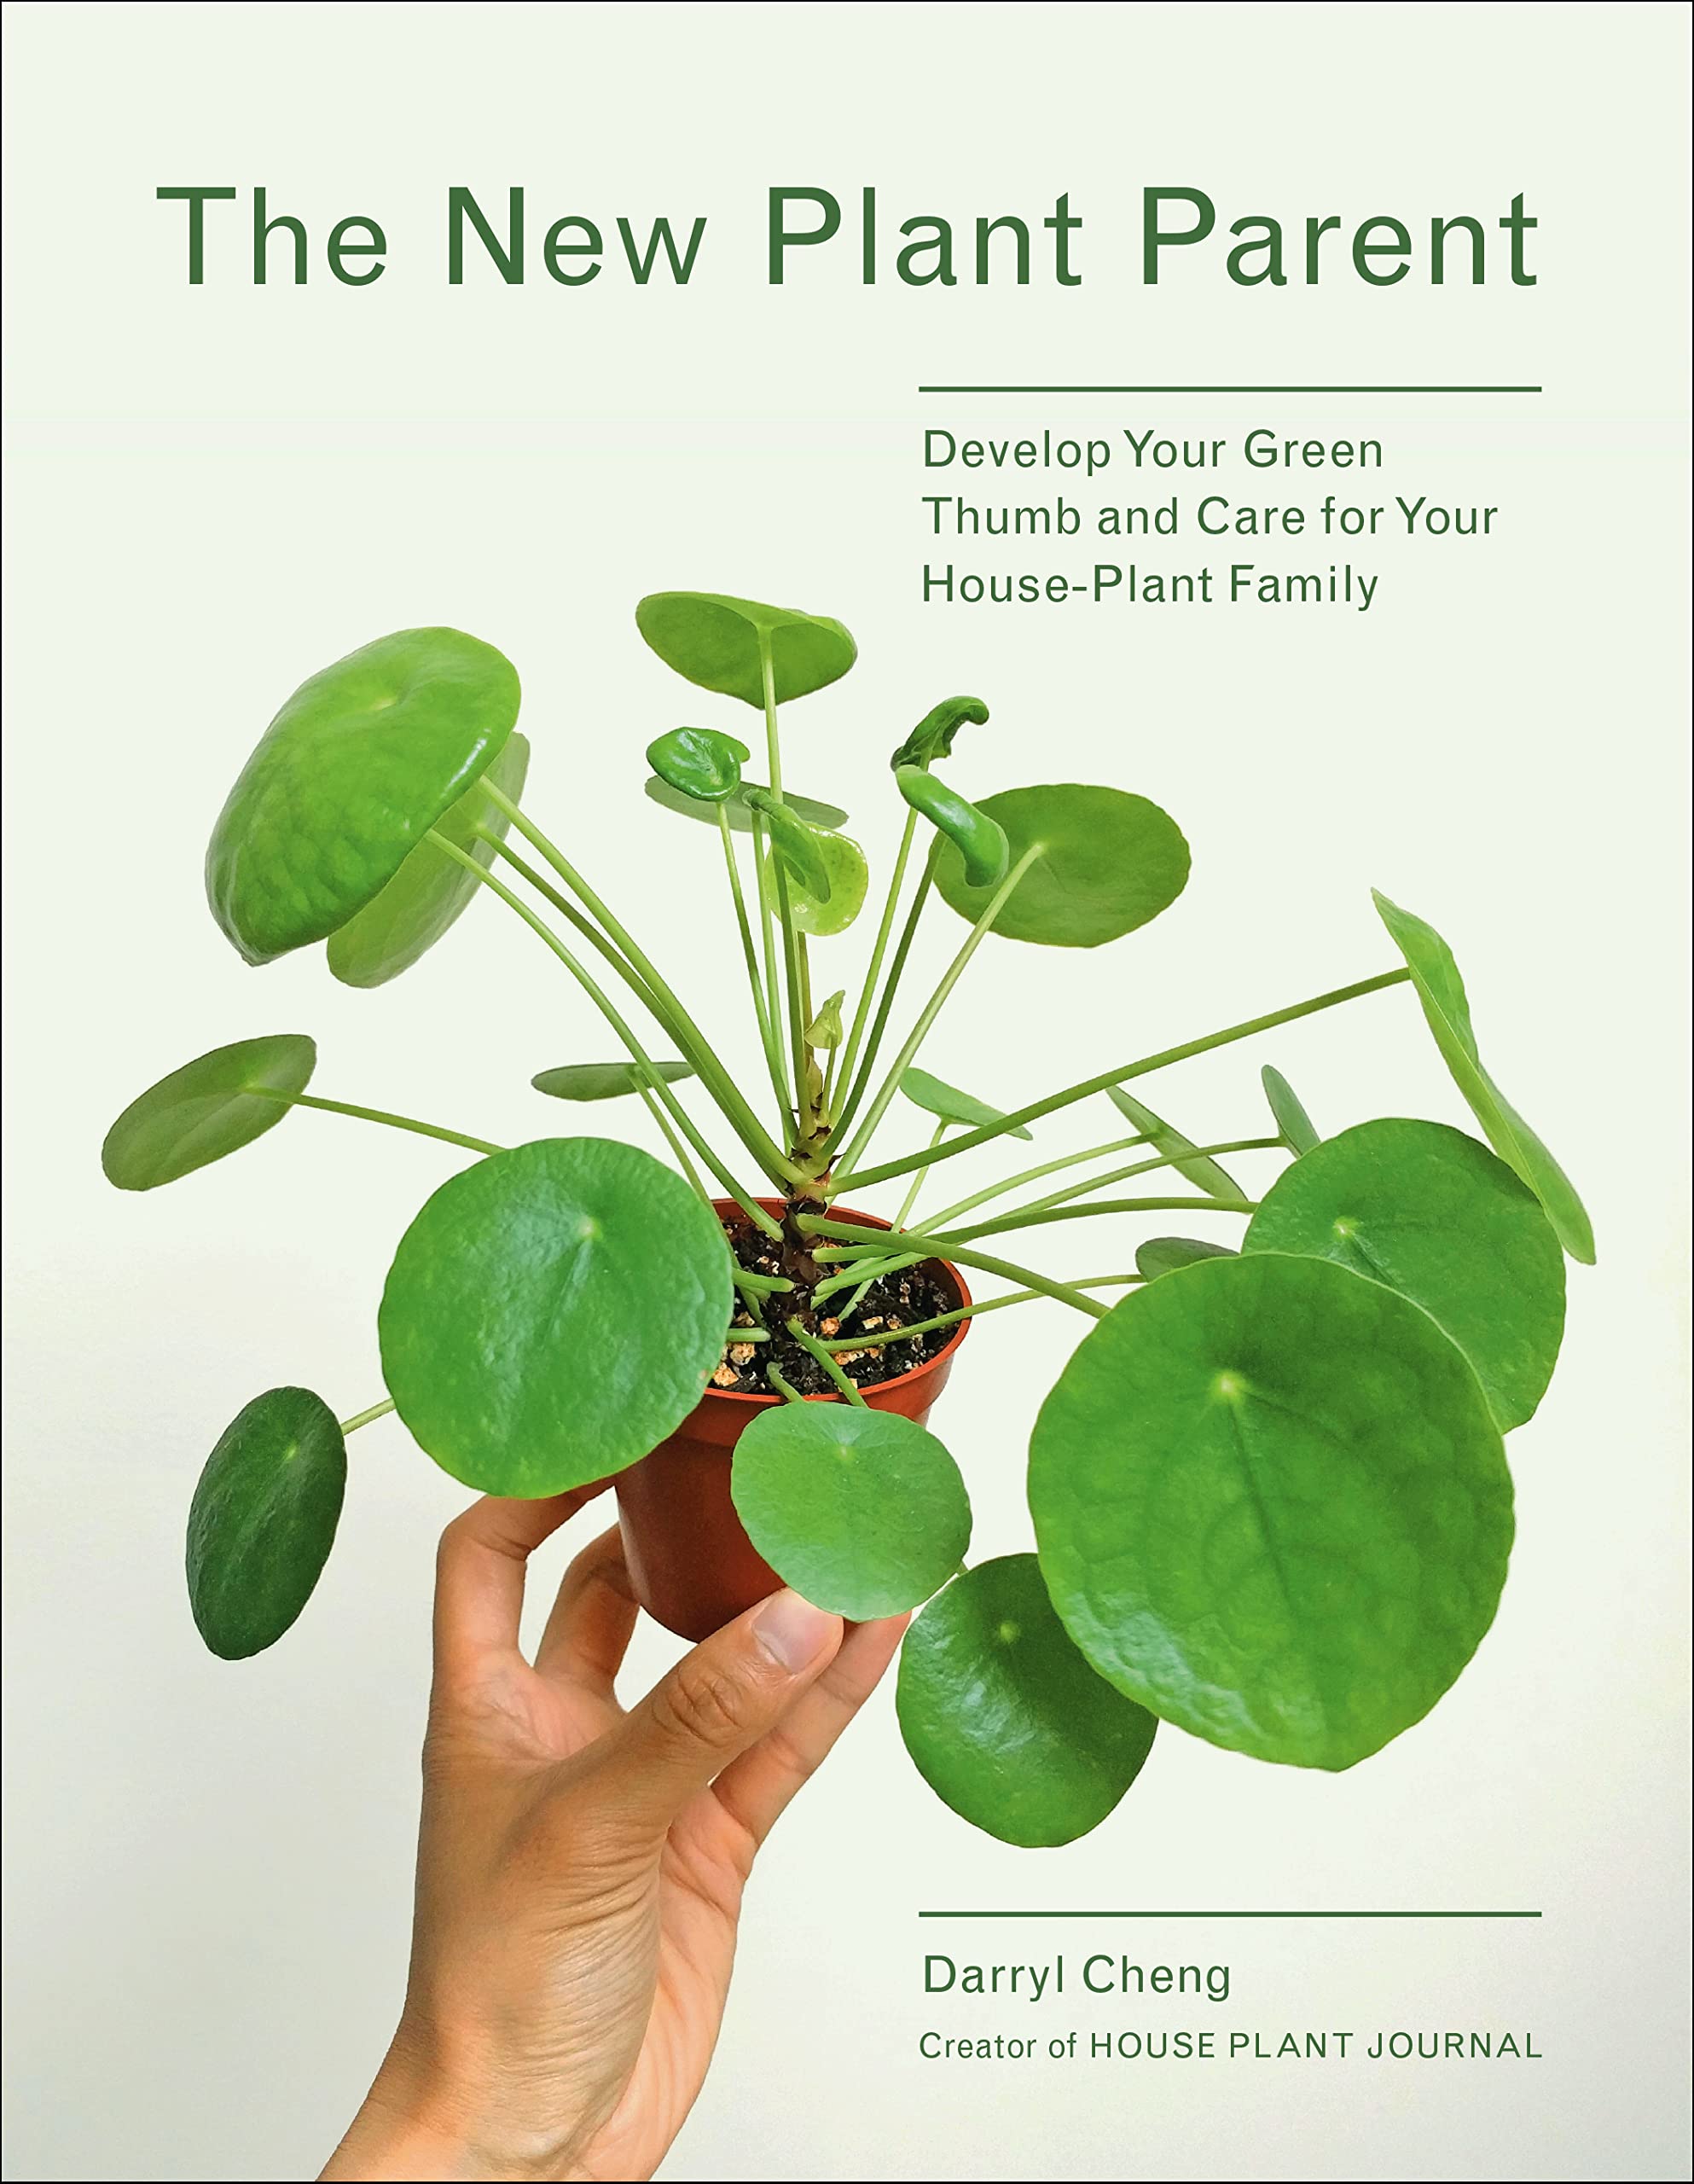 The New Plant Parent: Develop Your Green Thumb and Care for Your House-Plant Family (eBook) by Darryl Cheng $2.99